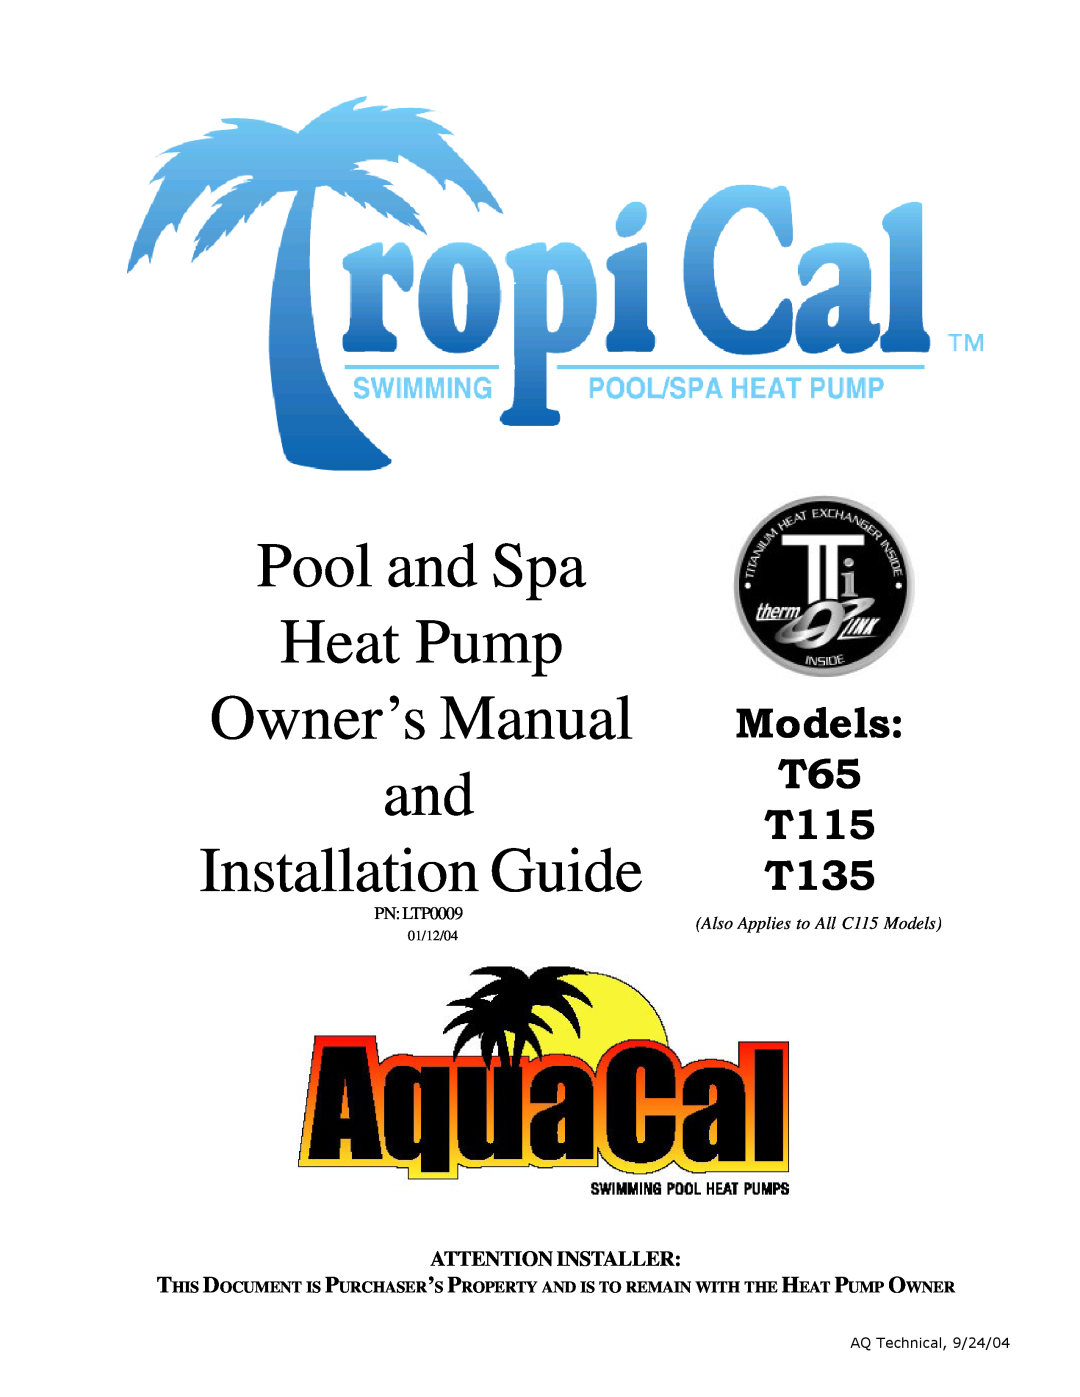 Aquacal owner manual Installation Guide, Models T65 T115 T135, Also Applies to All C115 Models, 1/7/04 